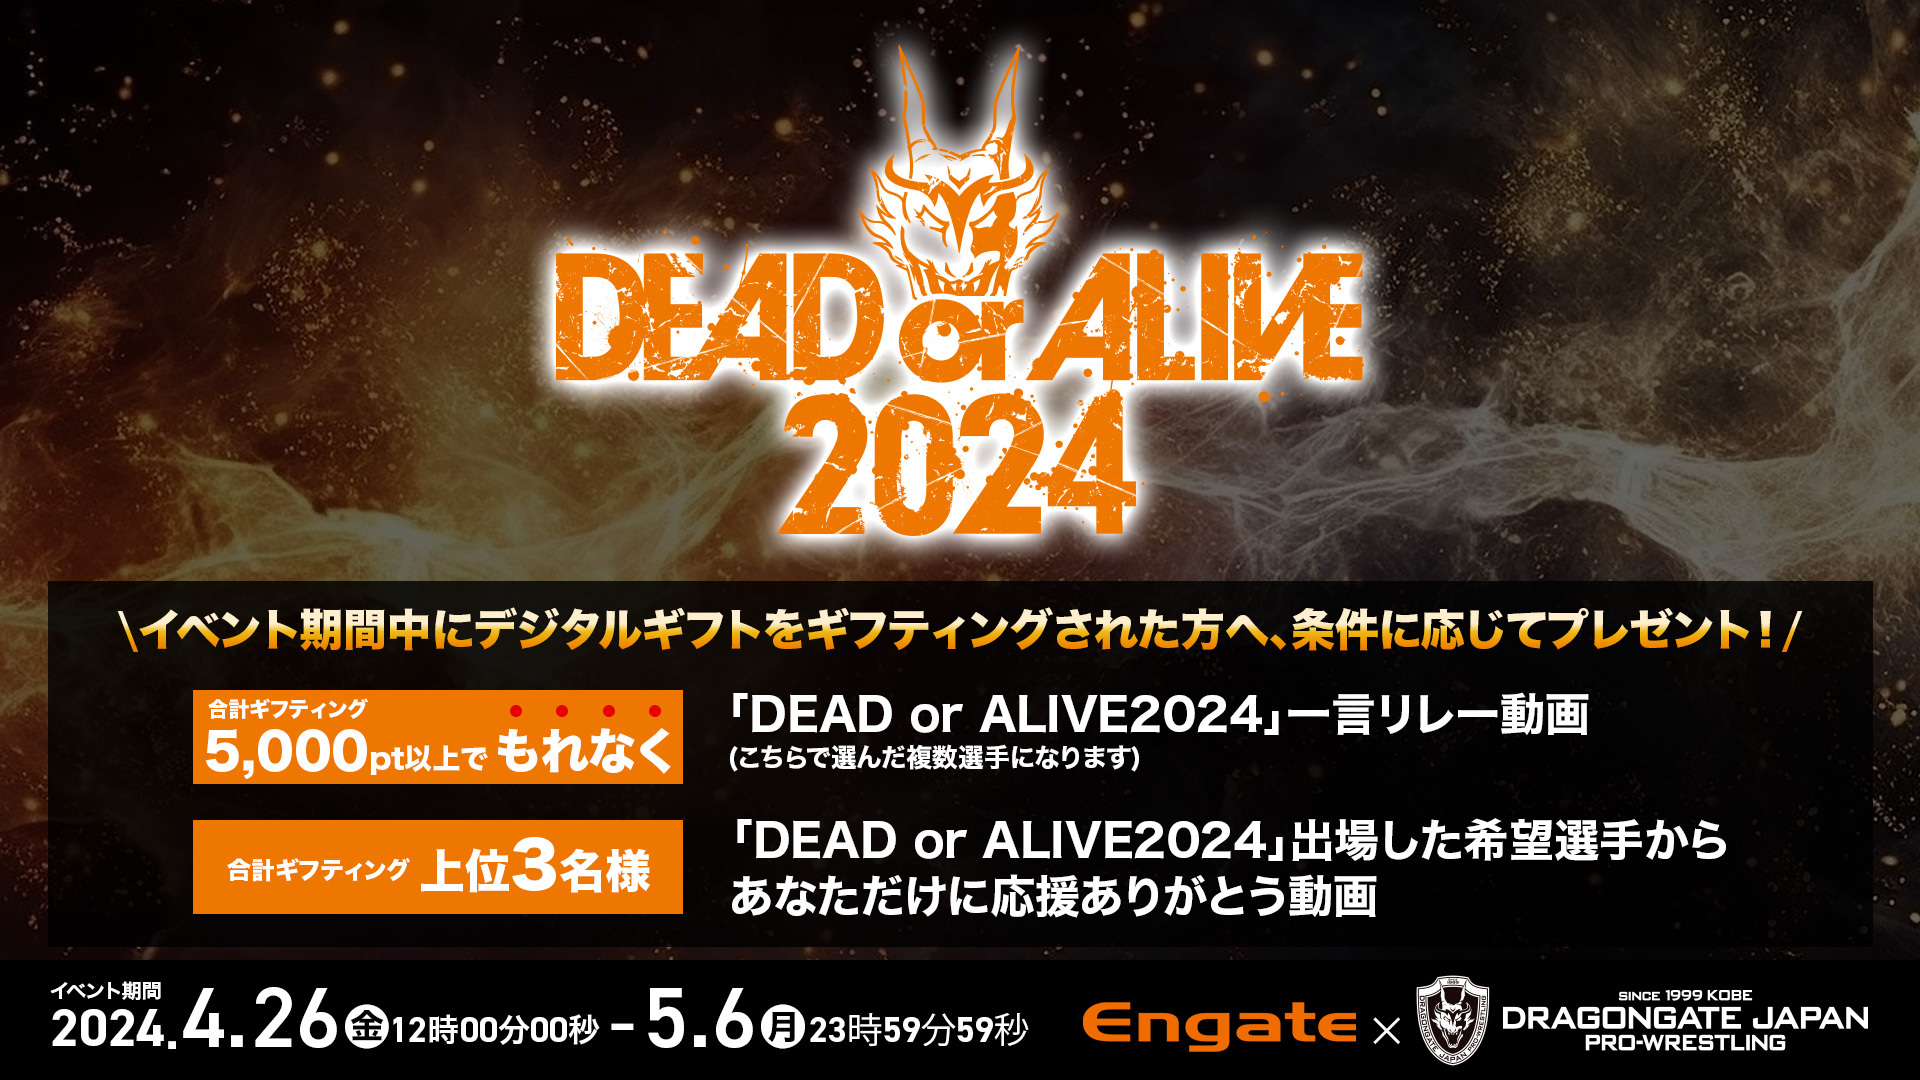 「DEAD or ALIVE2024」盛り上がれ↑応援イベント